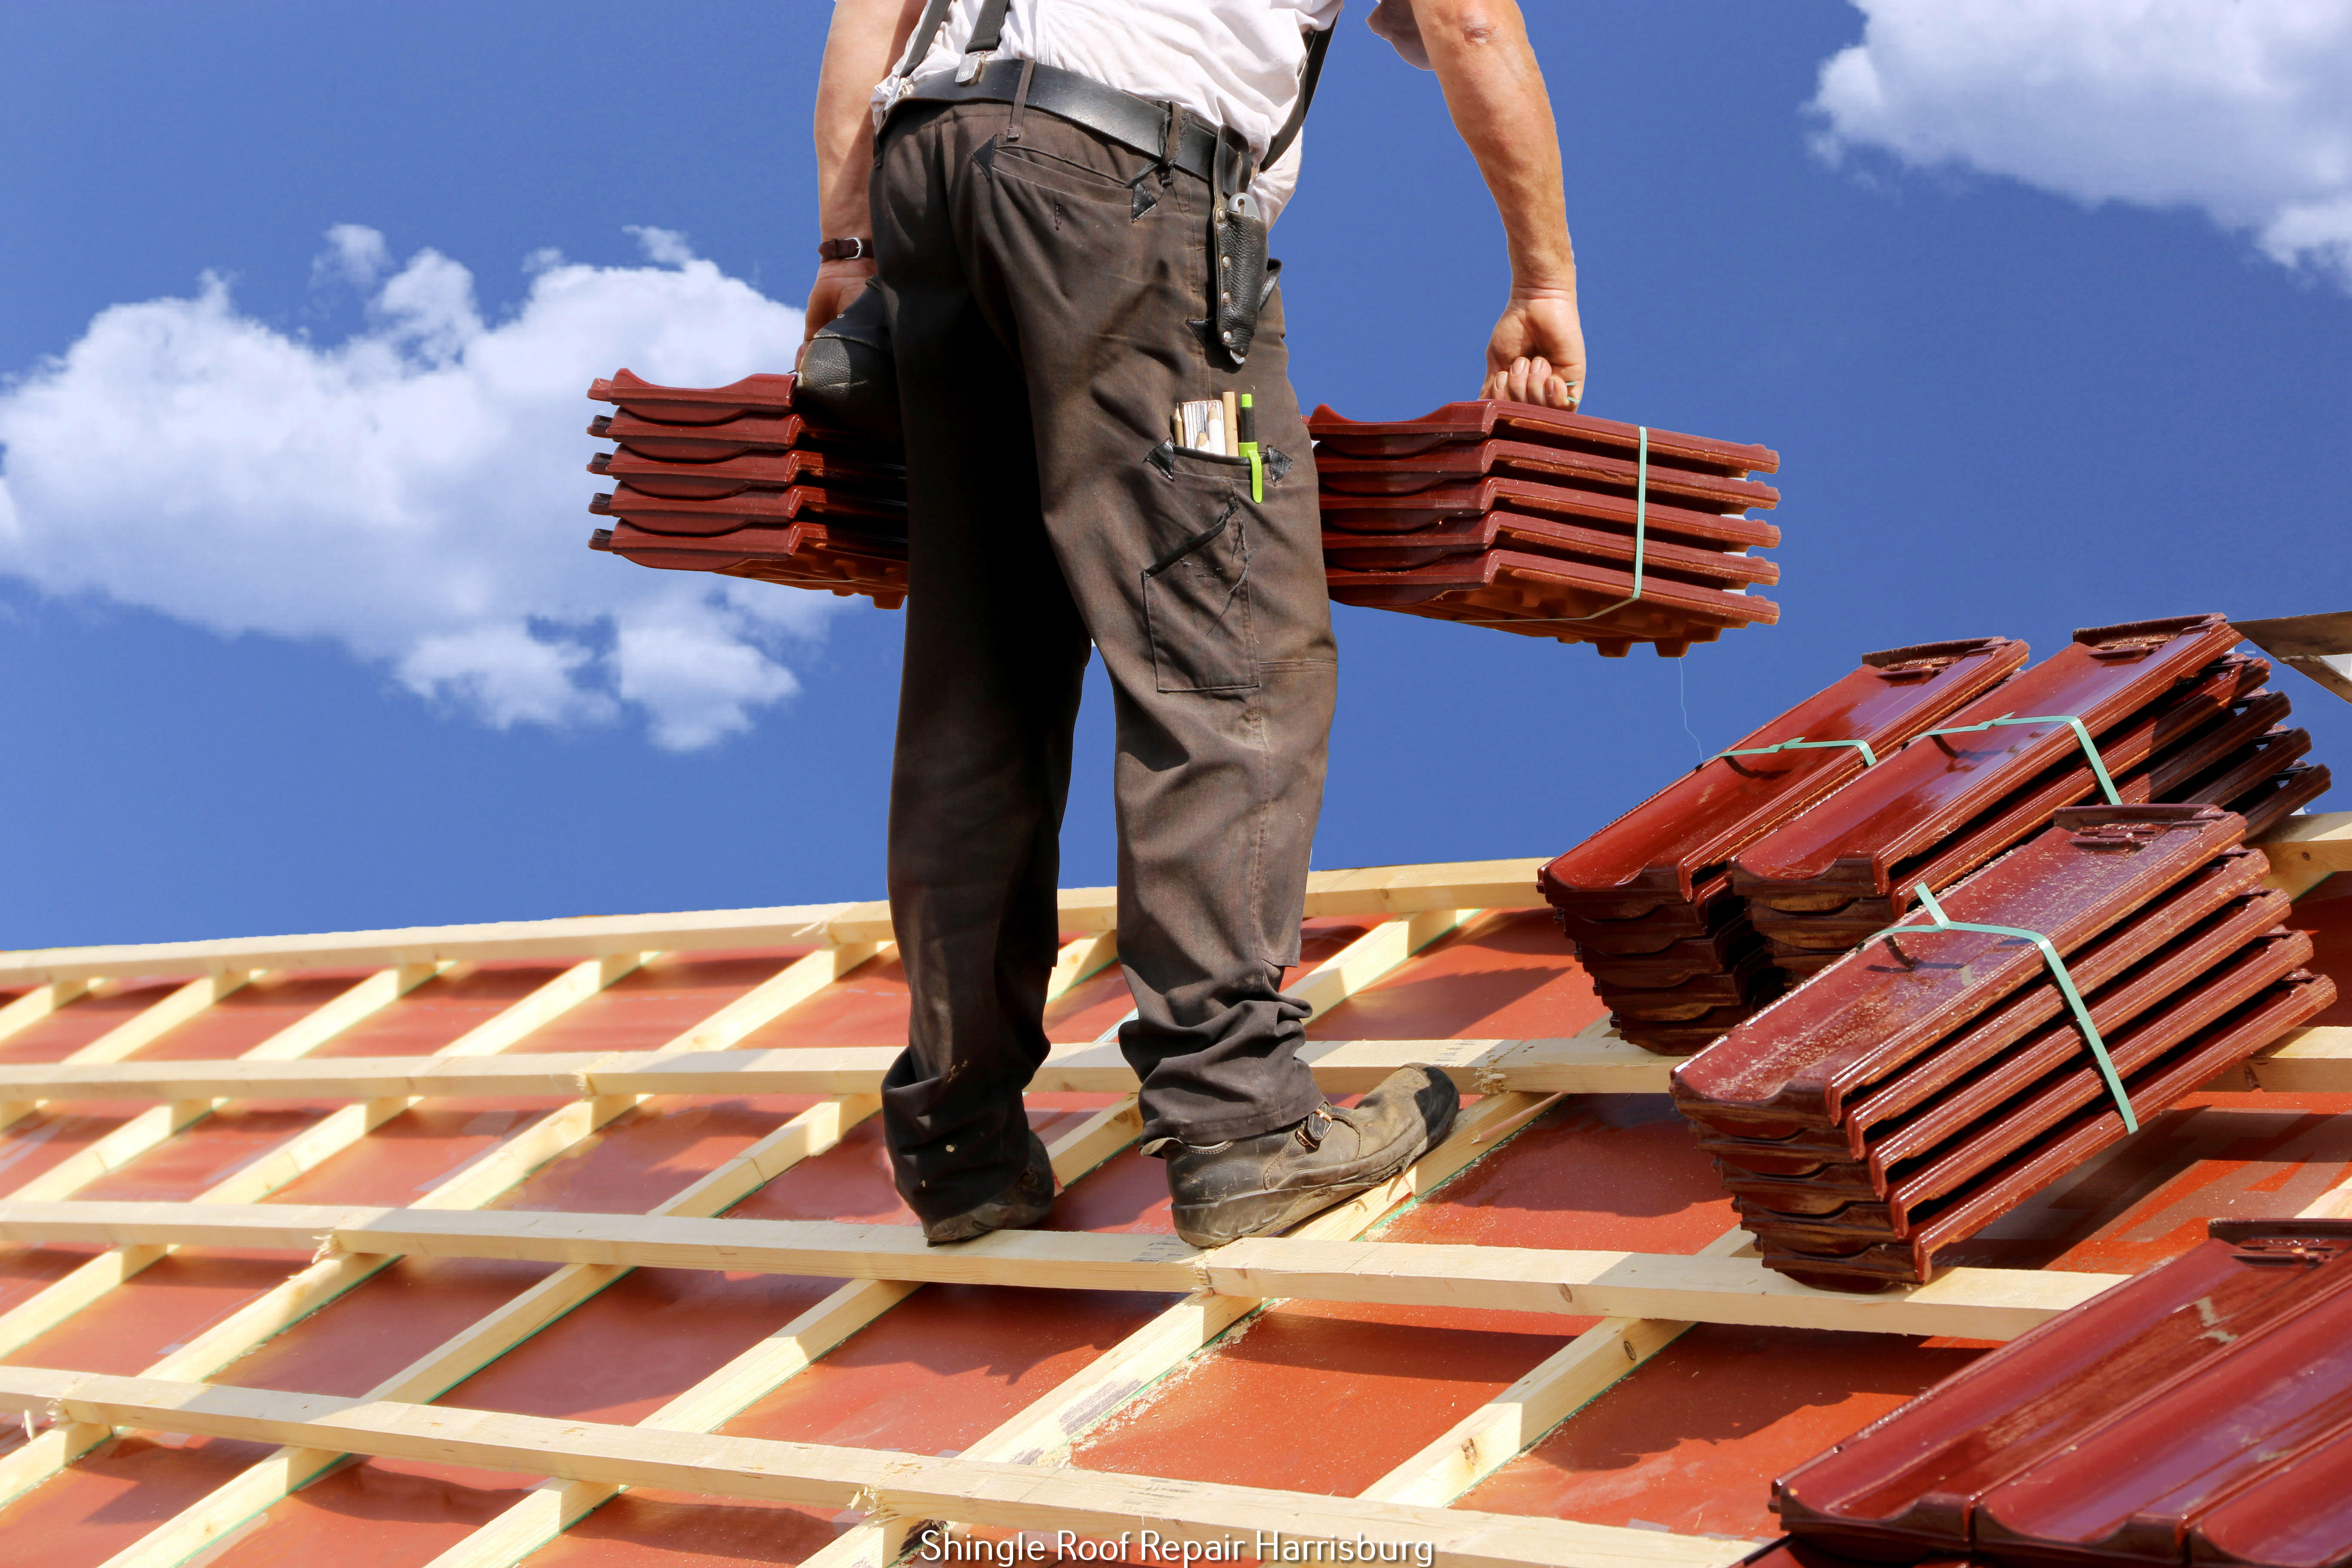 The Benefits of Working with a Professional Roofing Contractor